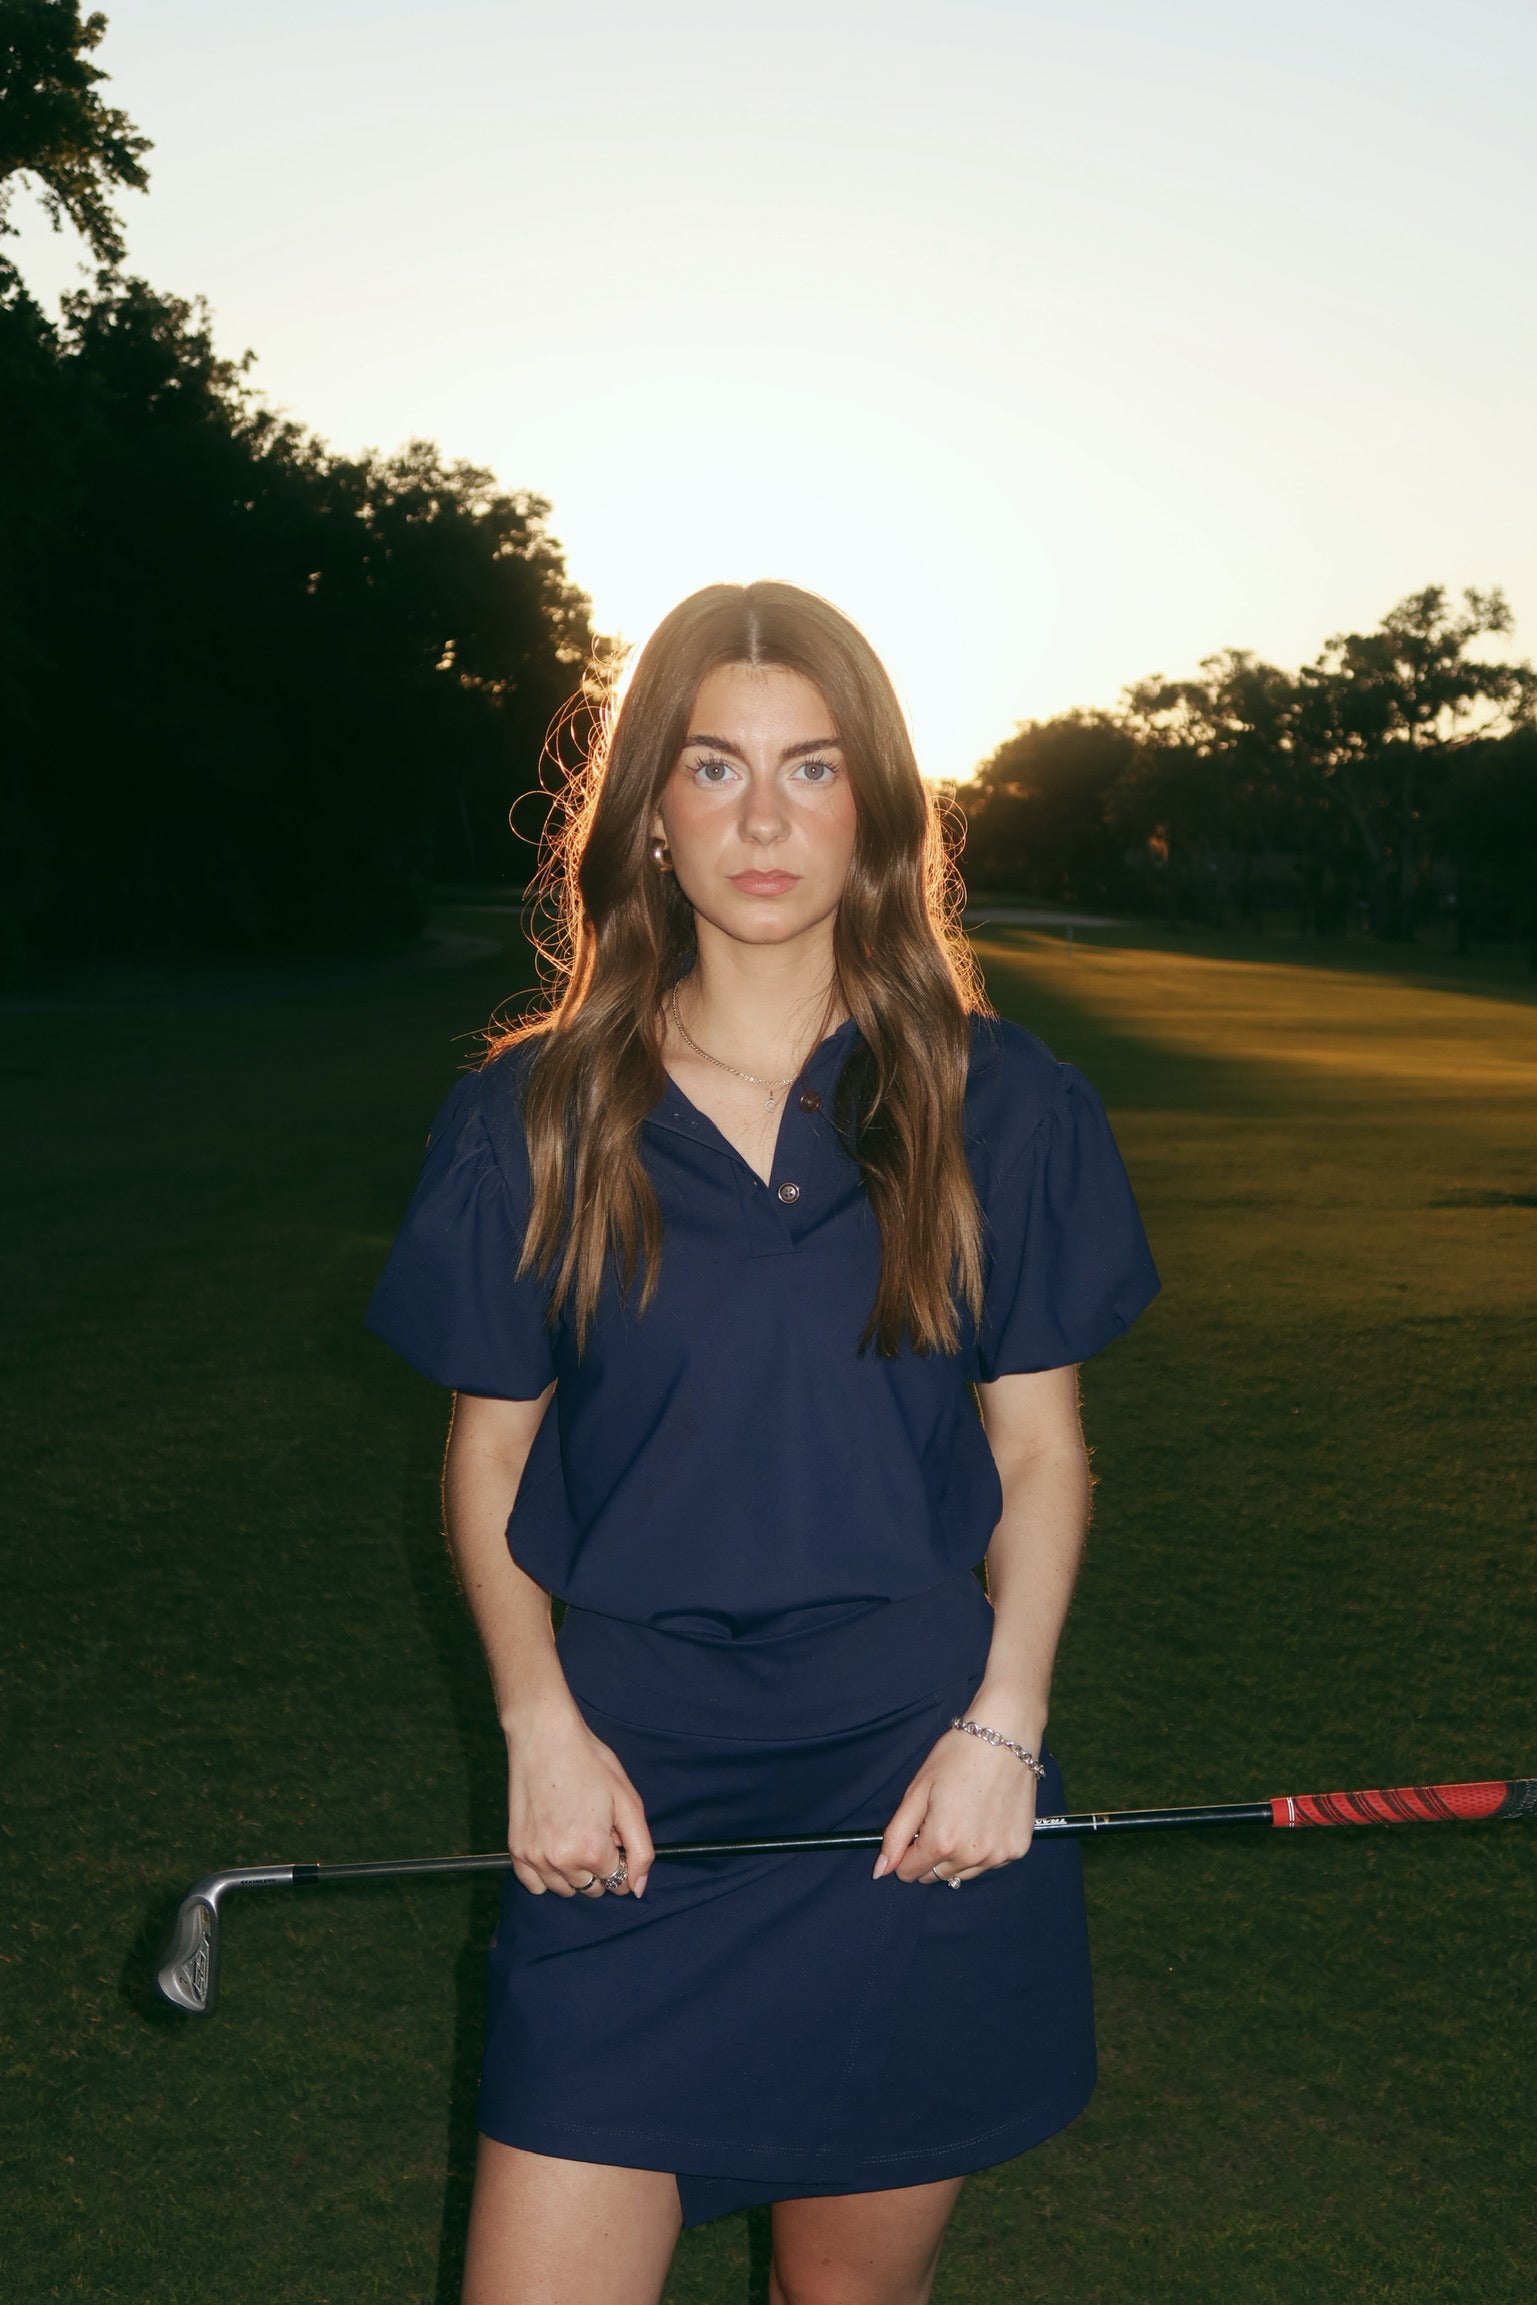 Introducing The Garde's Sofia Polo for Women